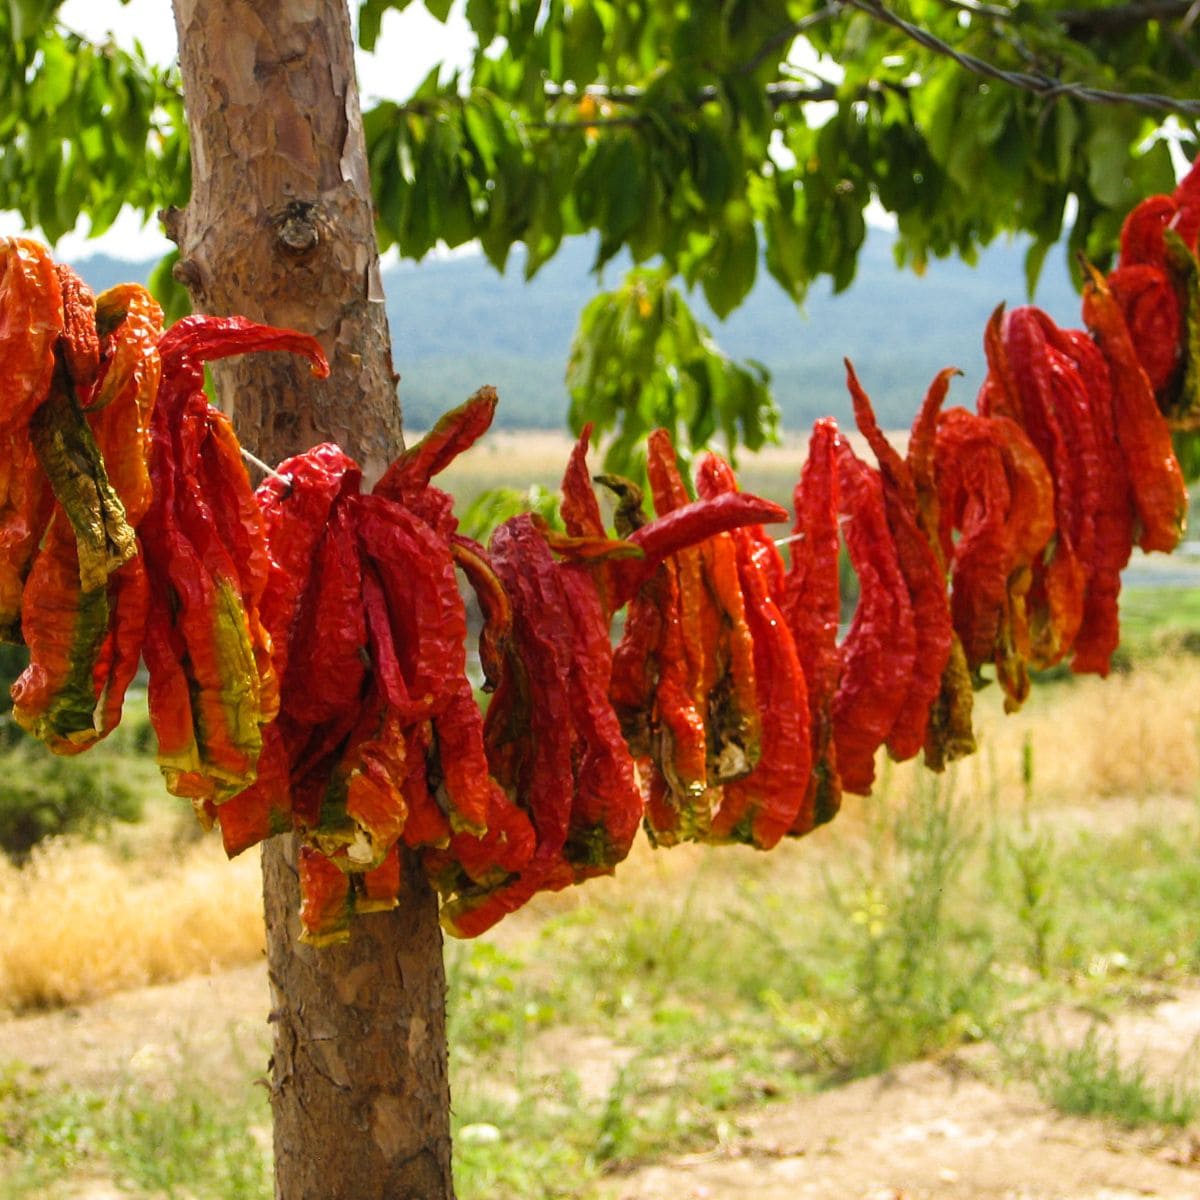 red peppers on a string in an orchard.